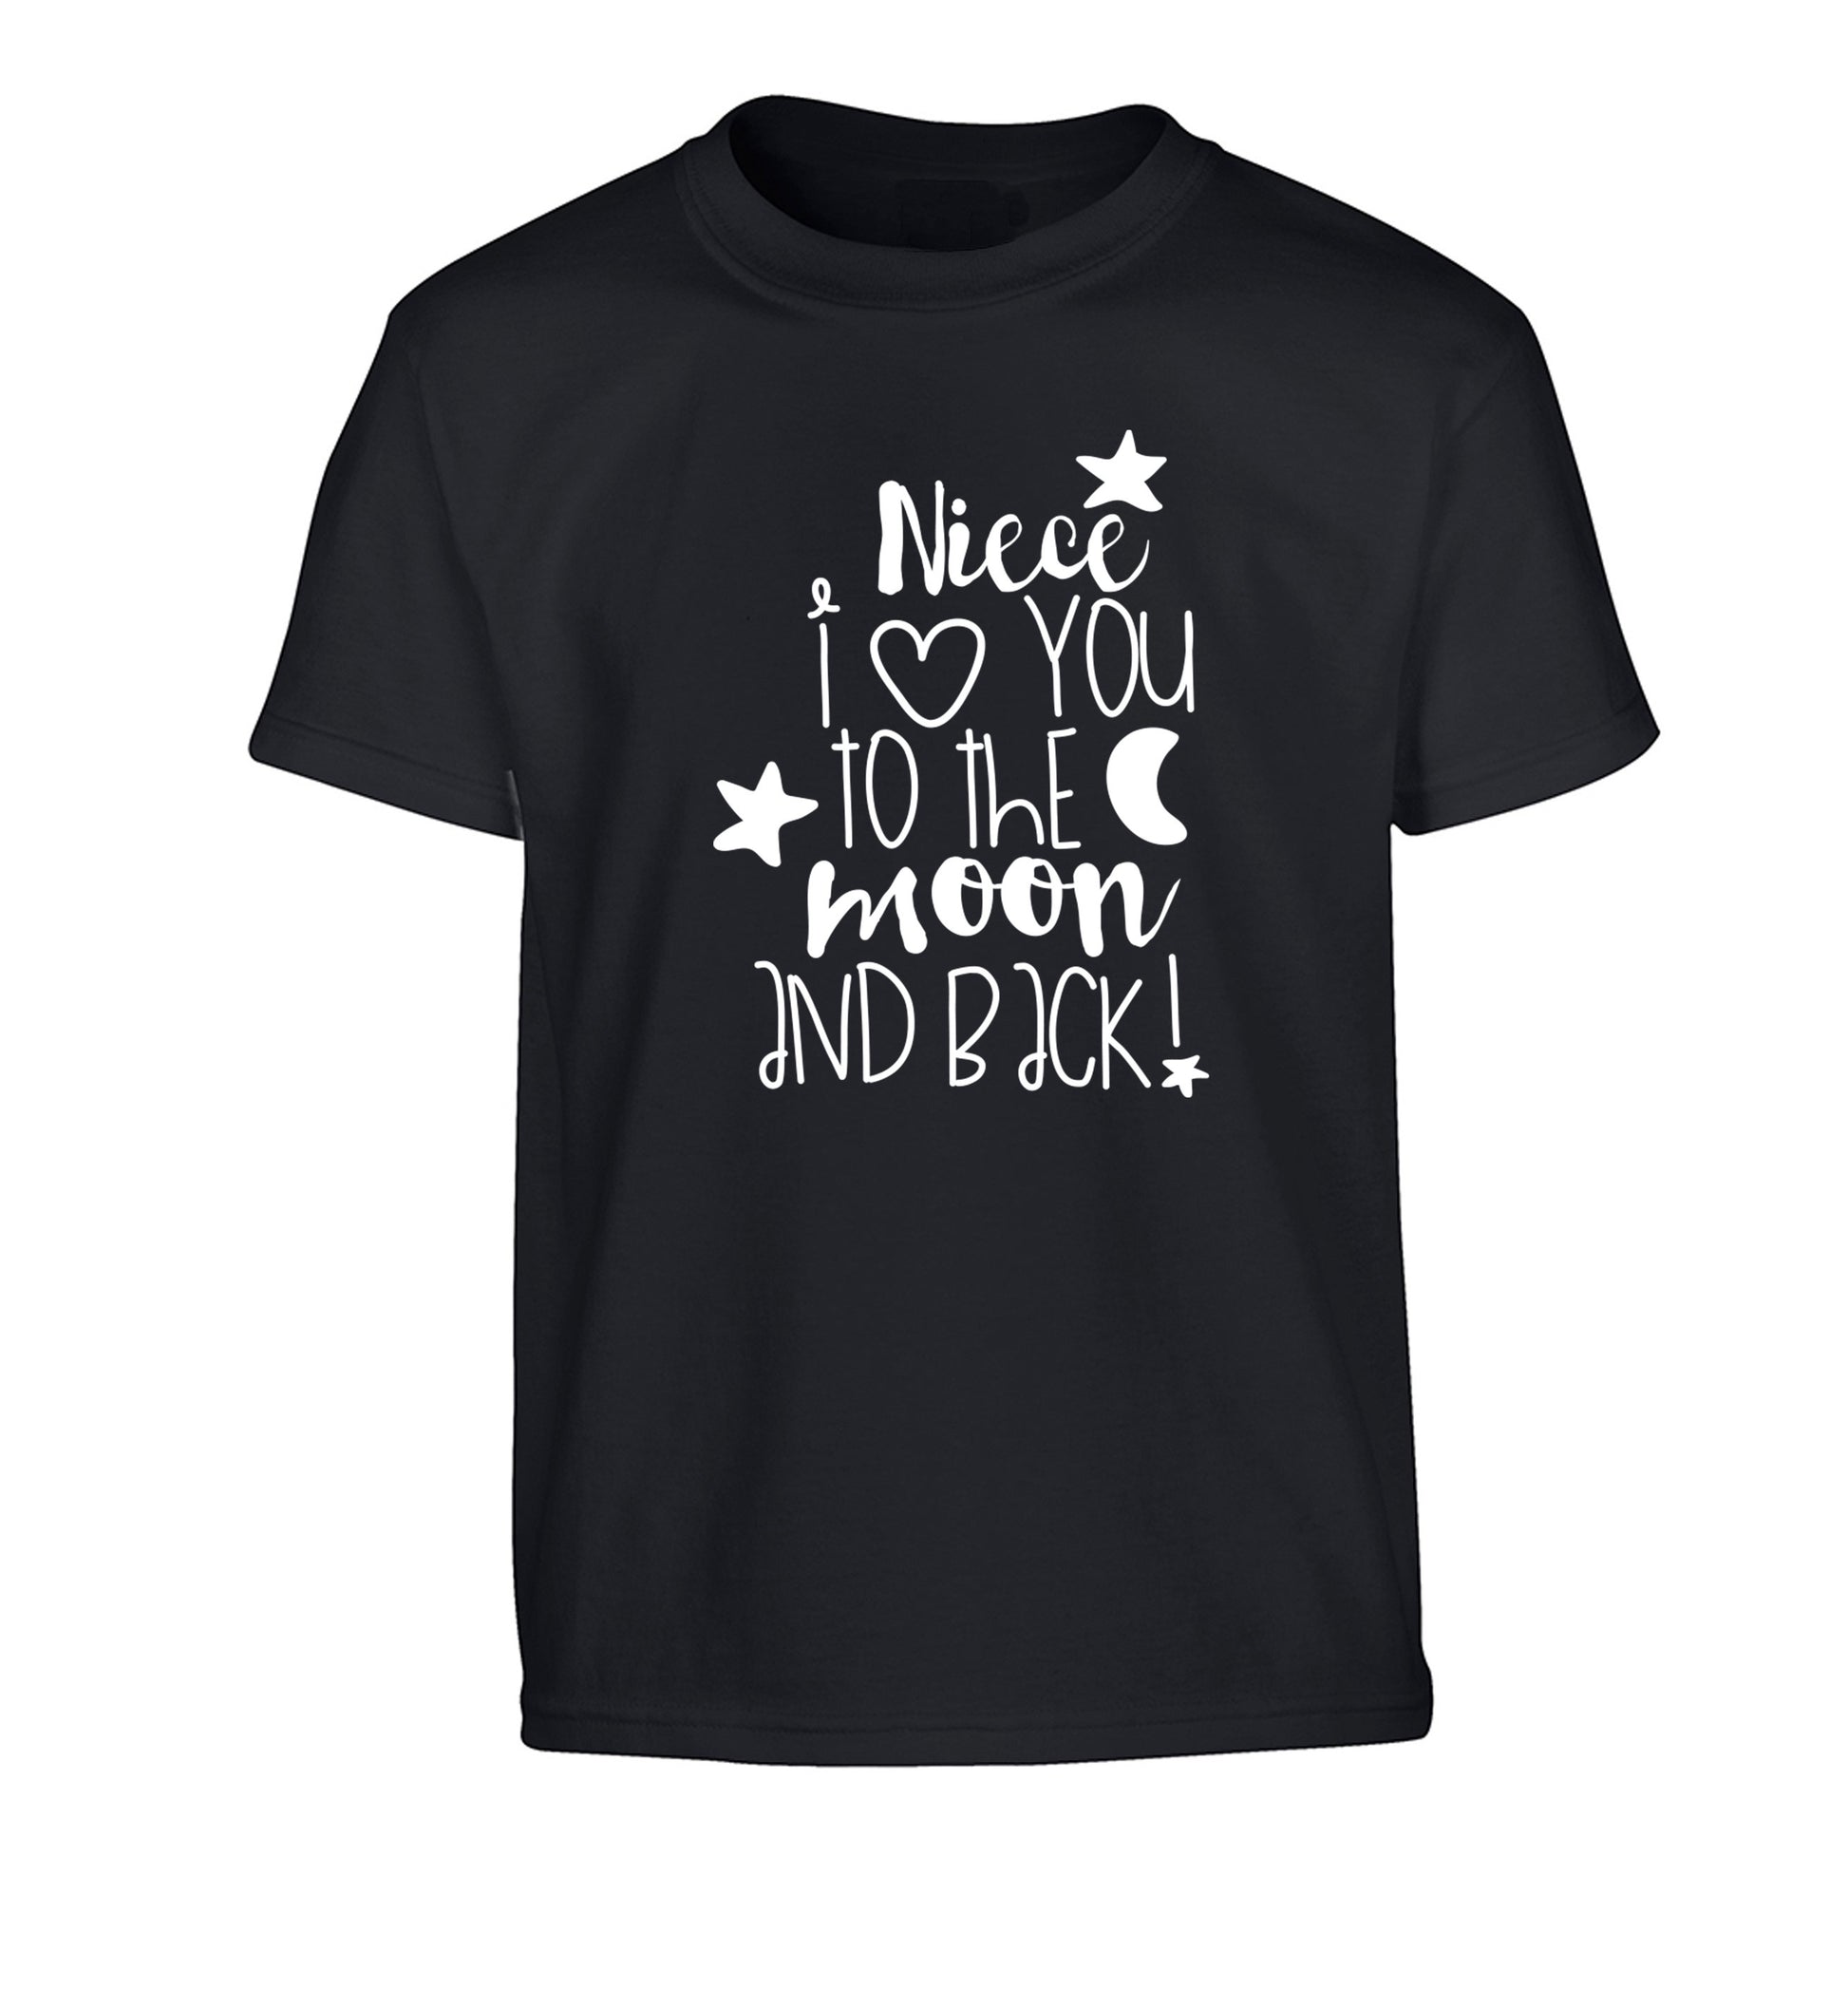 Niece I love you to the moon and back Children's black Tshirt 12-14 Years